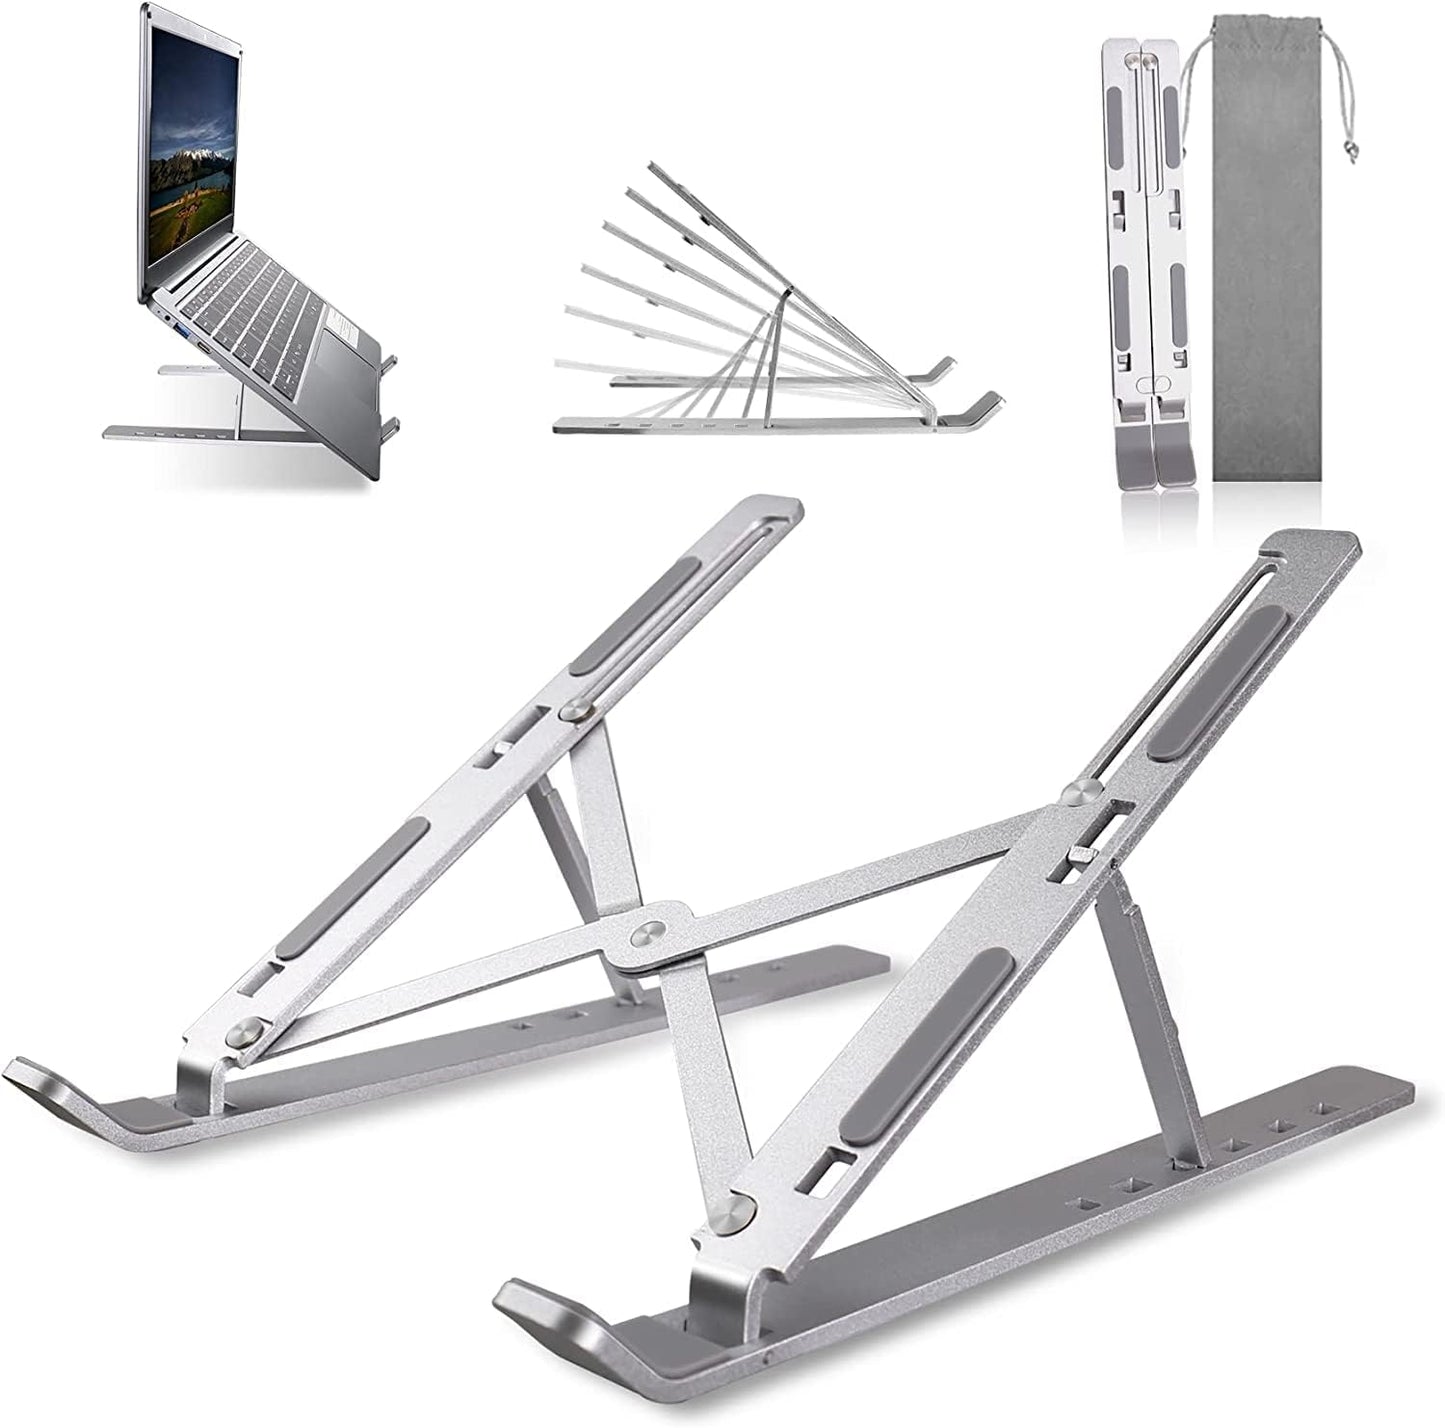 New Laptop Stand for Desk, Computer Stand Laptop Riser for Laptop, Portable Notebook Stand Compatible with 9-15.6 inch Laptops(Silver)